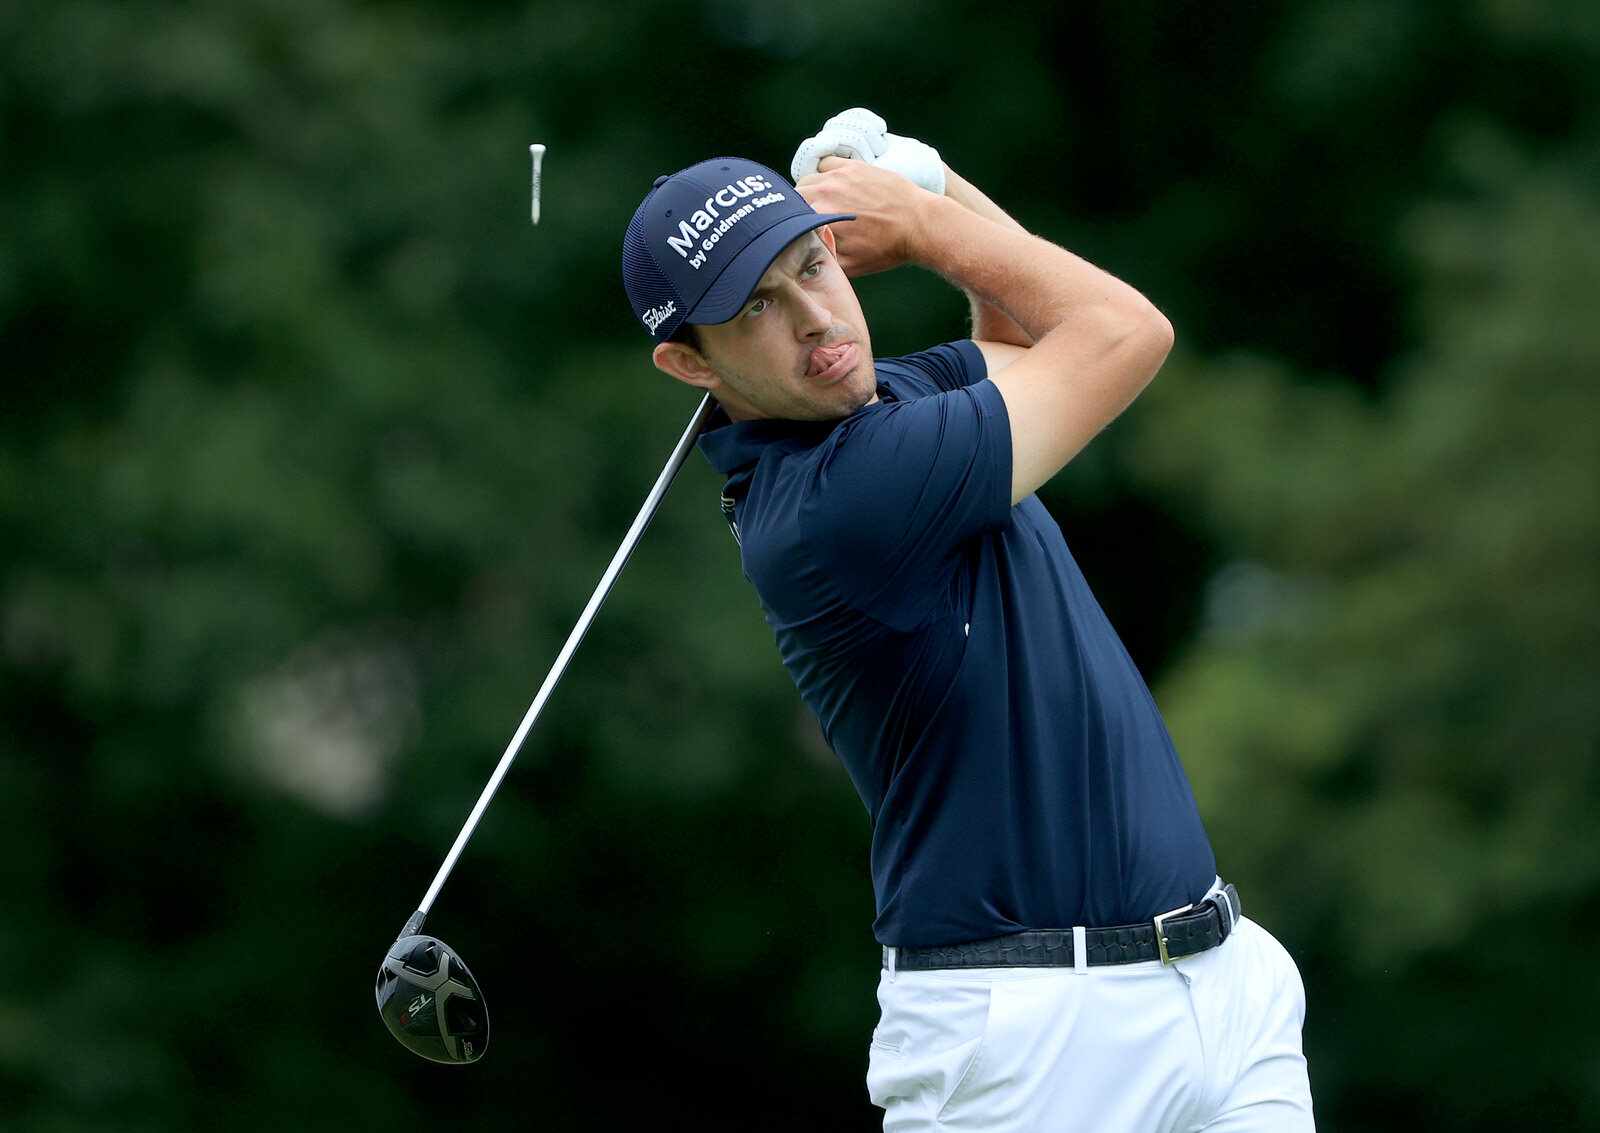  DUBLIN, OHIO - JULY 12: Patrick Cantlay of the United States plays his shot from the 18th tee during the final round of the Workday Charity Open on July 12, 2020 at Muirfield Village Golf Club in Dublin, Ohio. (Photo by Sam Greenwood/Getty Images) 